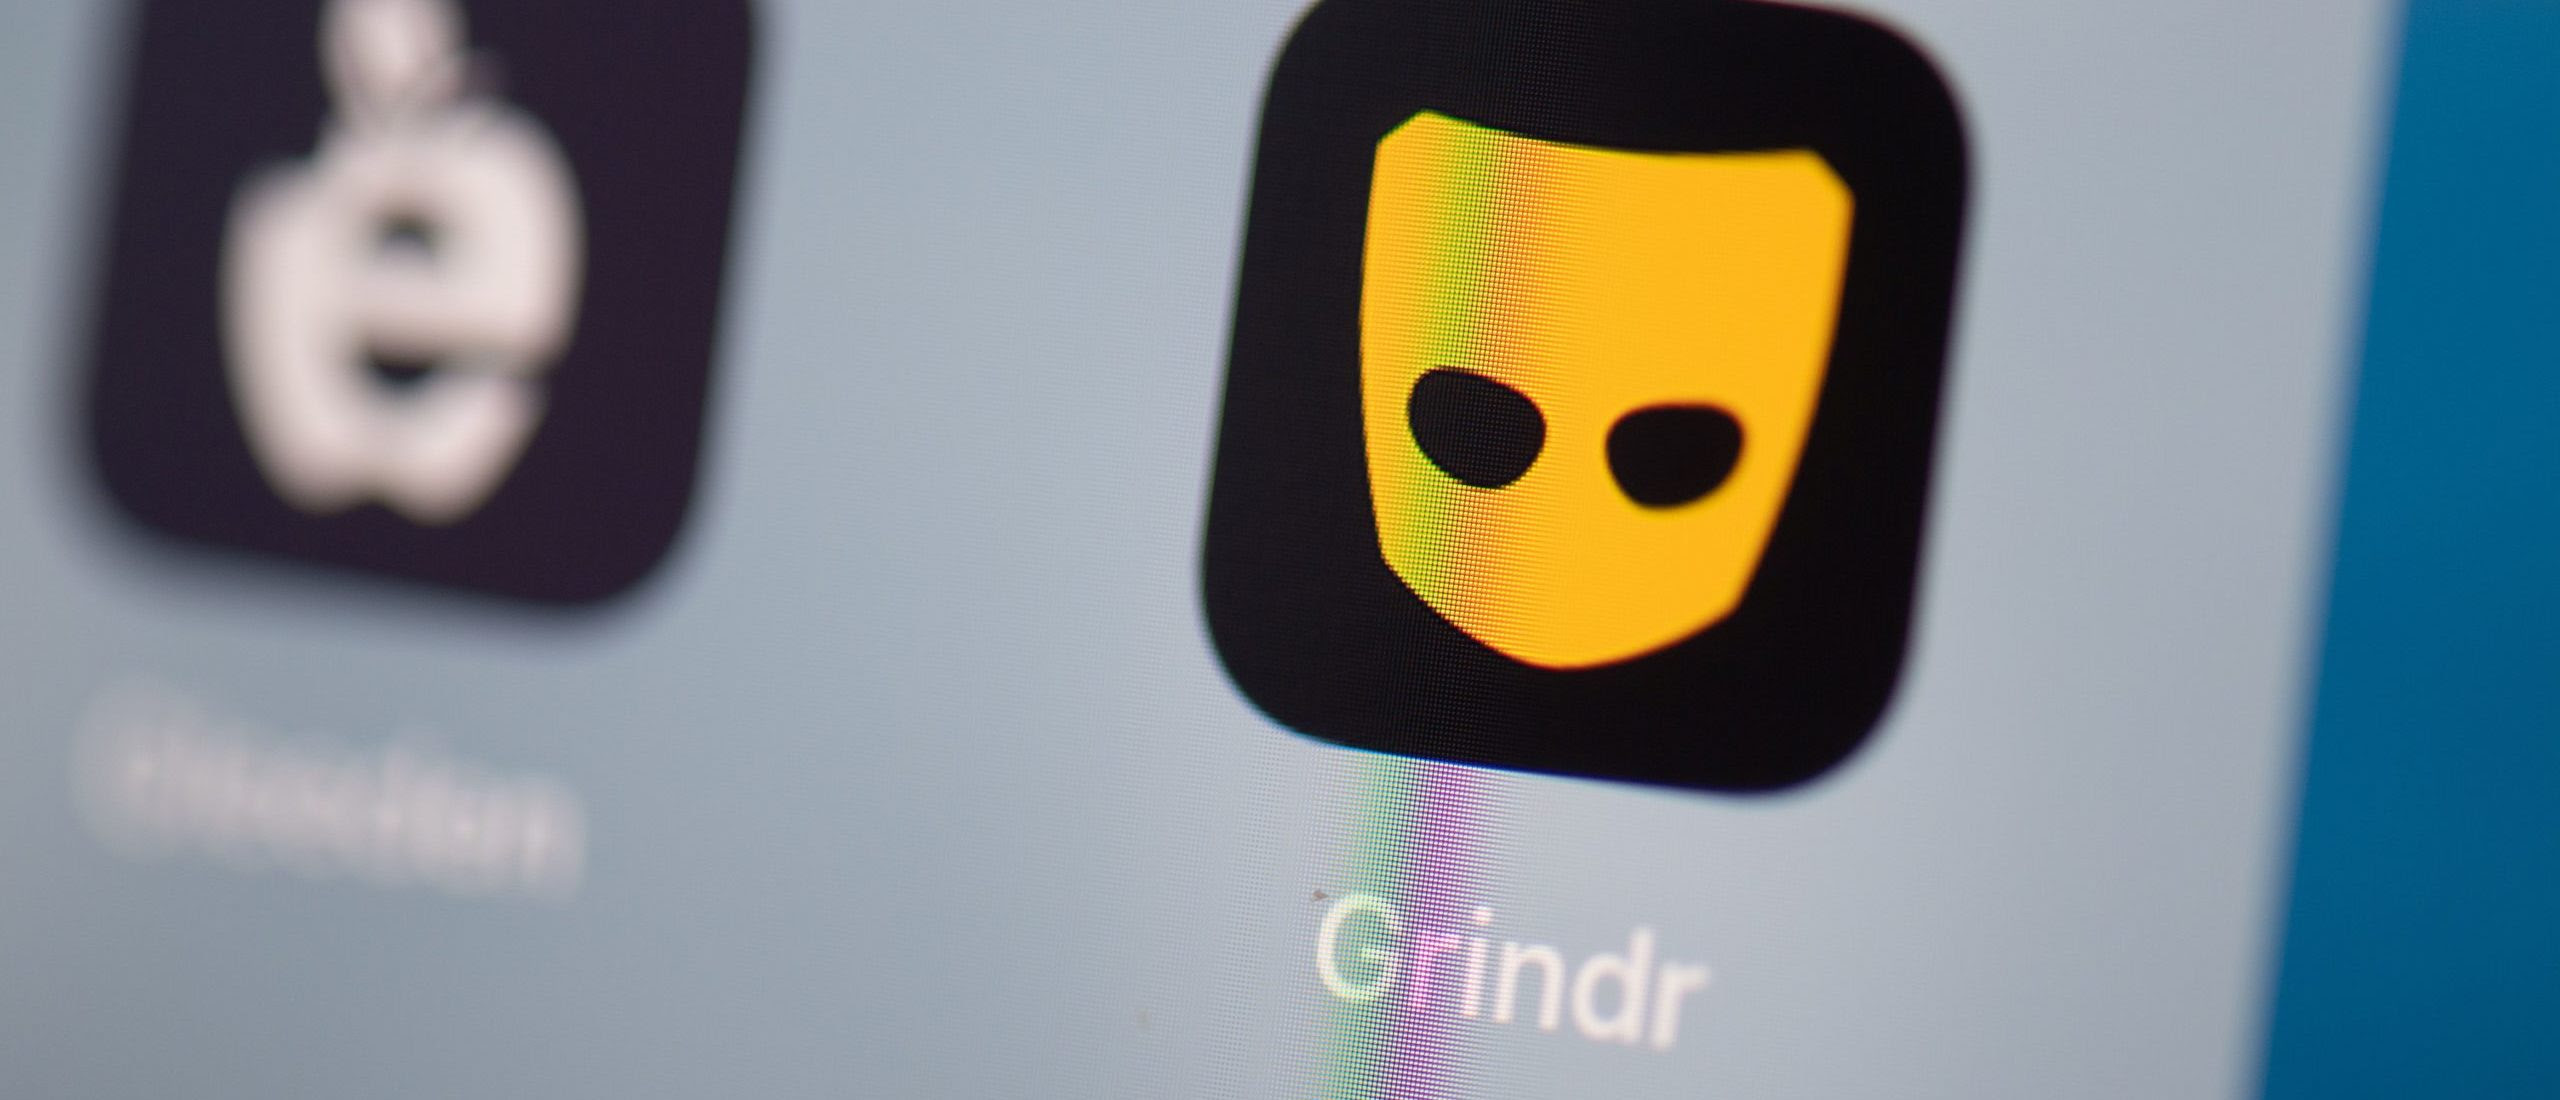 Police Use LGBTQ Dating Apps to Make More Than 60 Drug-Related Arrests in Sting Operation